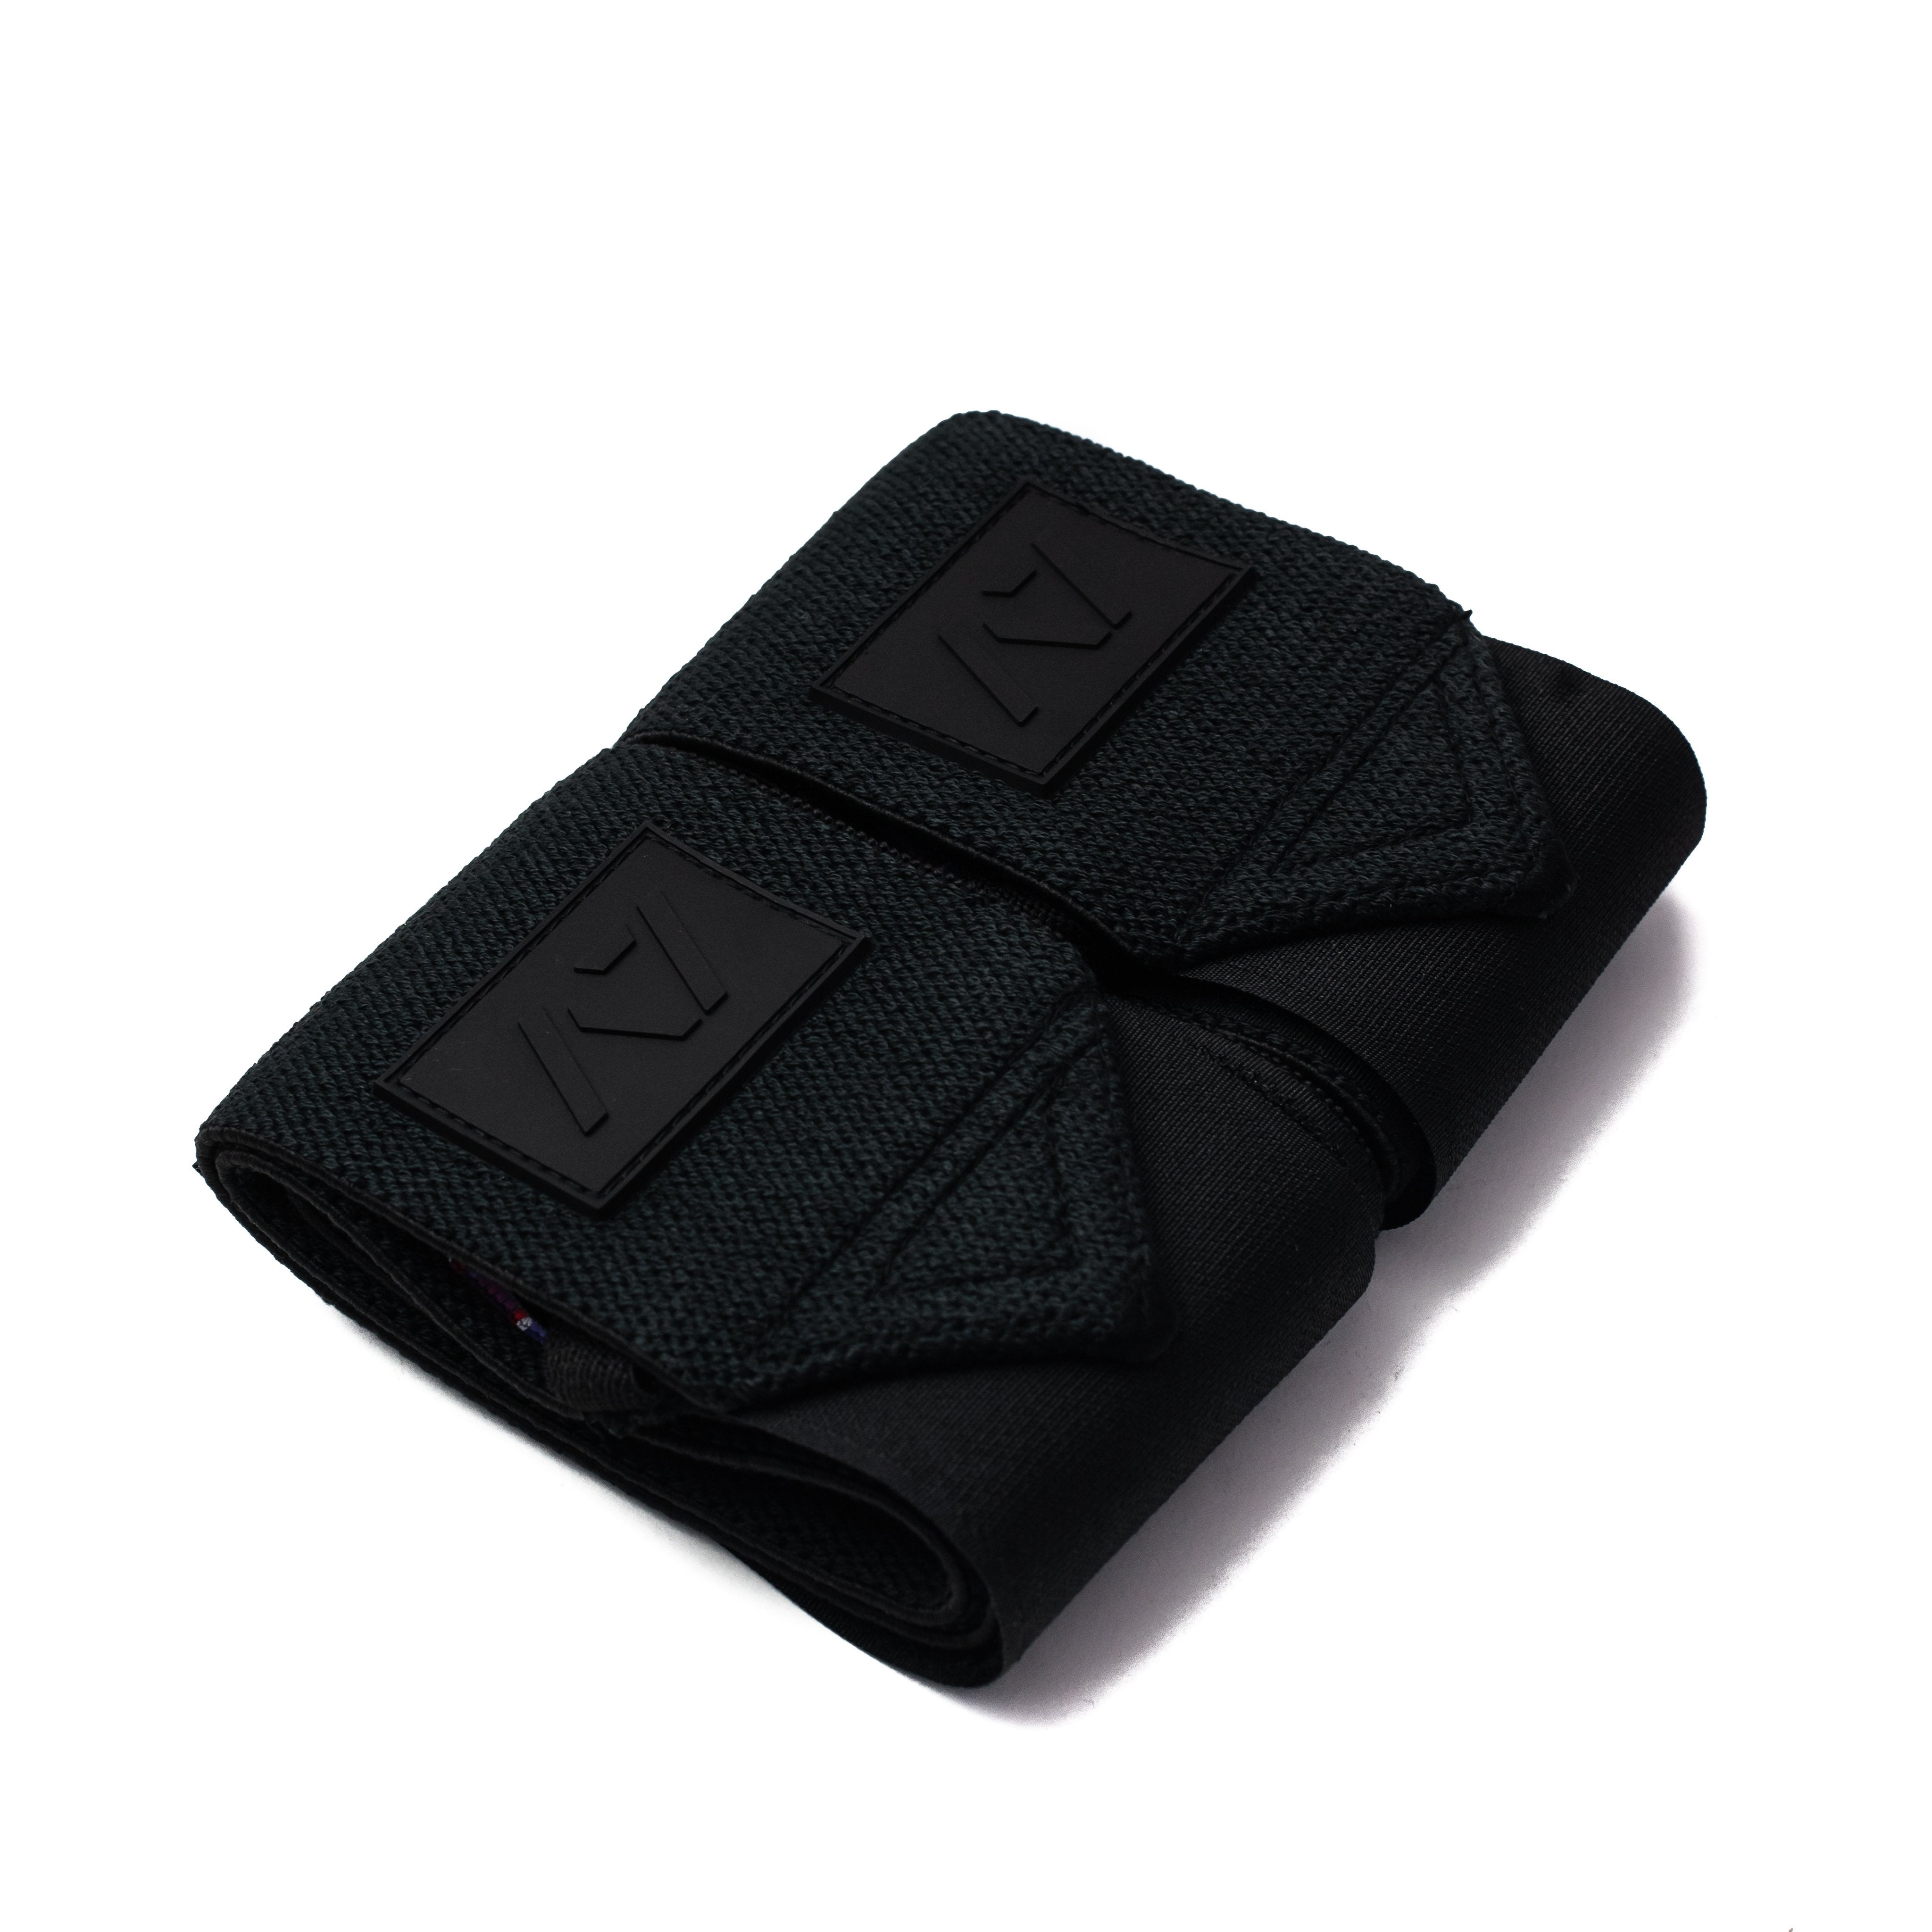 This Stealth colourway was created to mute out the logos and keep contrast at a minimum. A colourway that lets your performance and dedication remain the focus while still providing the level of quality, support and comfort you demand from your products. These wrist wraps are a perfect addition to your IPF approved kit.